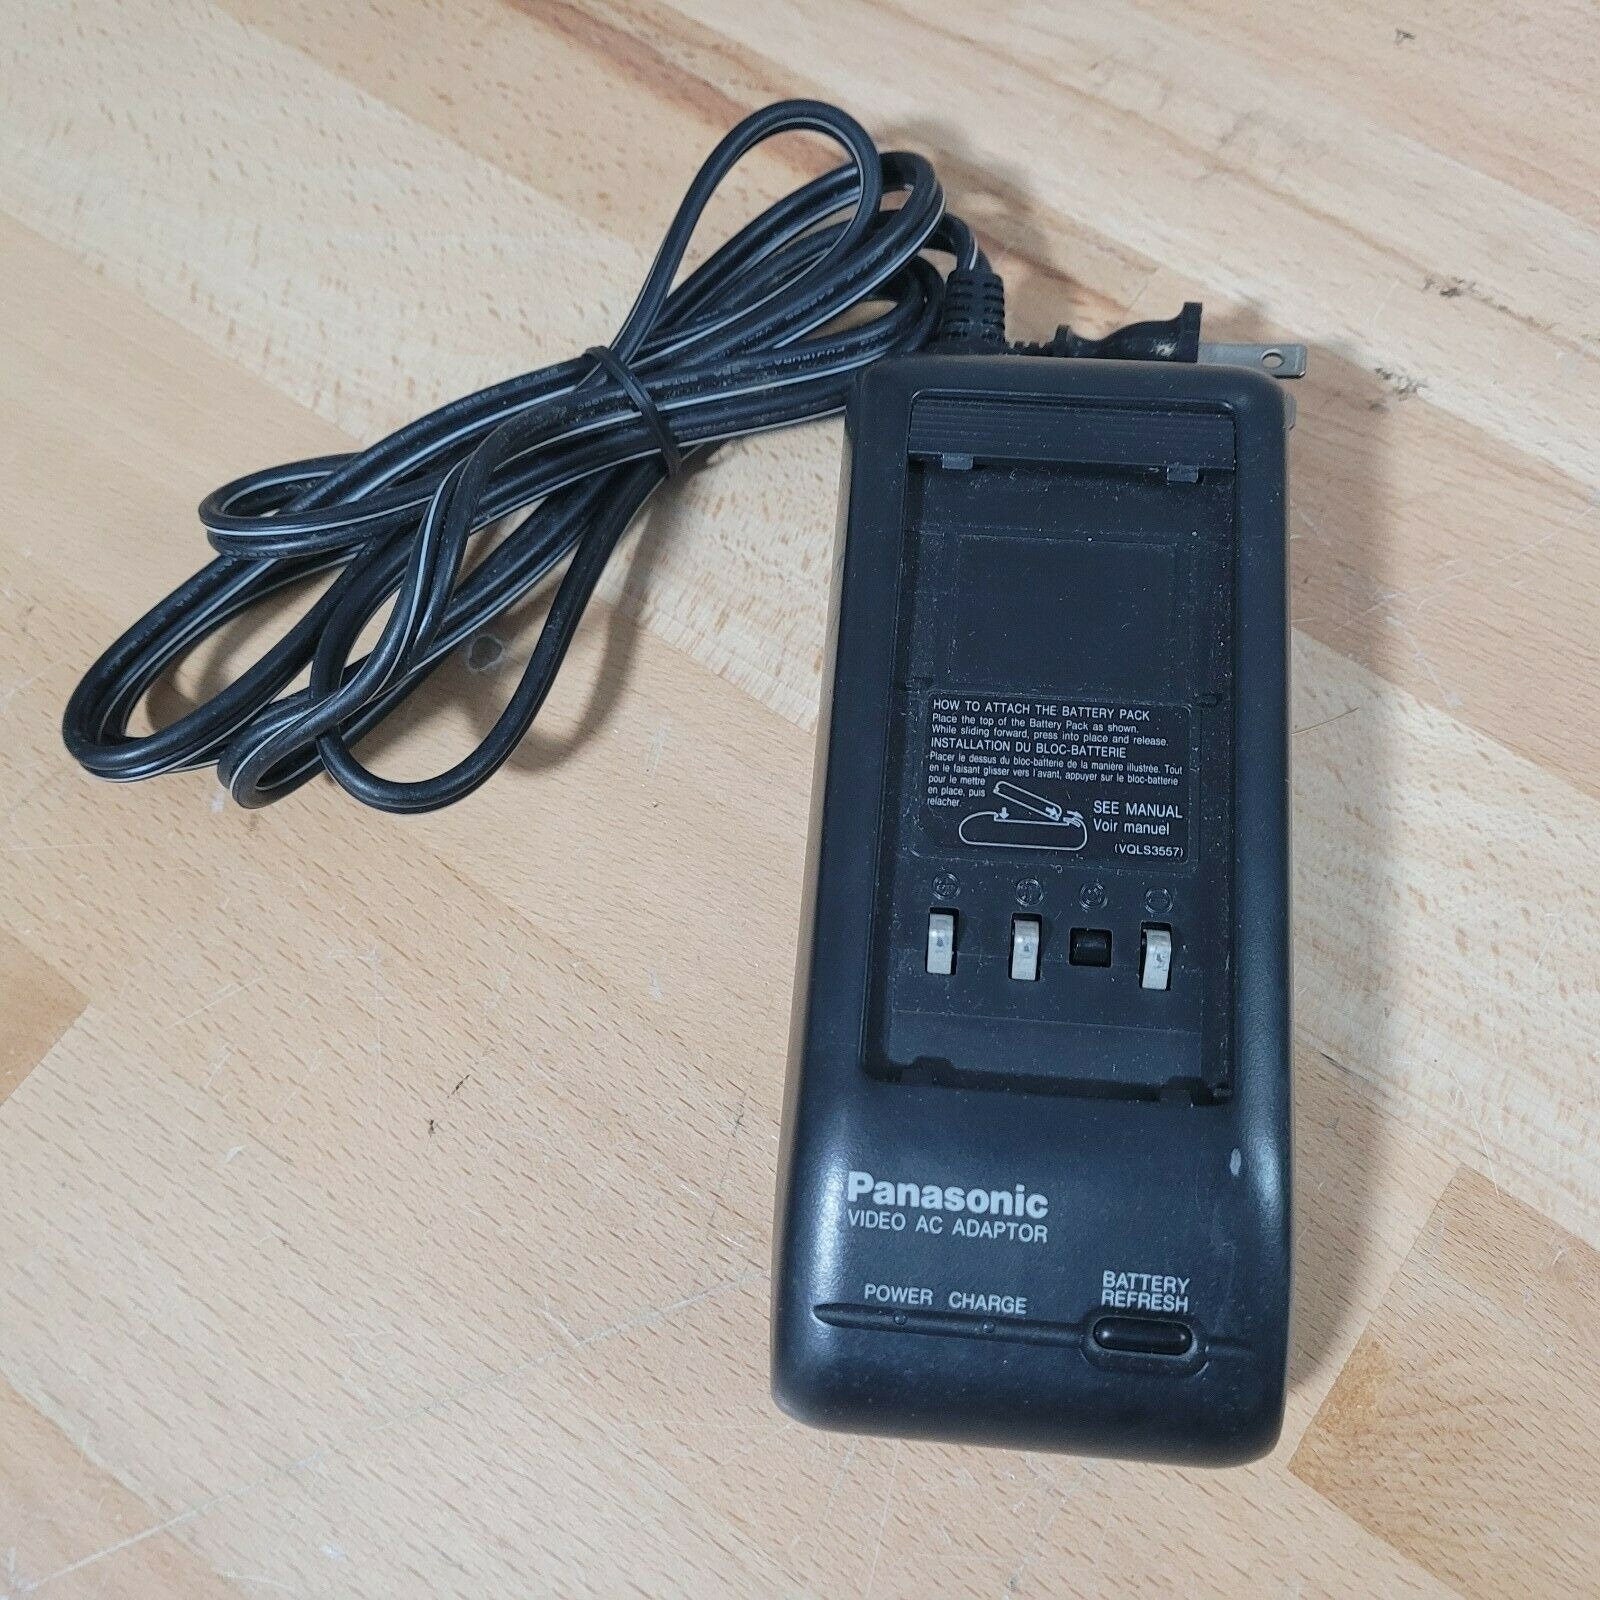 Panasonic AC Adapter Battery Charger PV-A16 For Video Camcorder